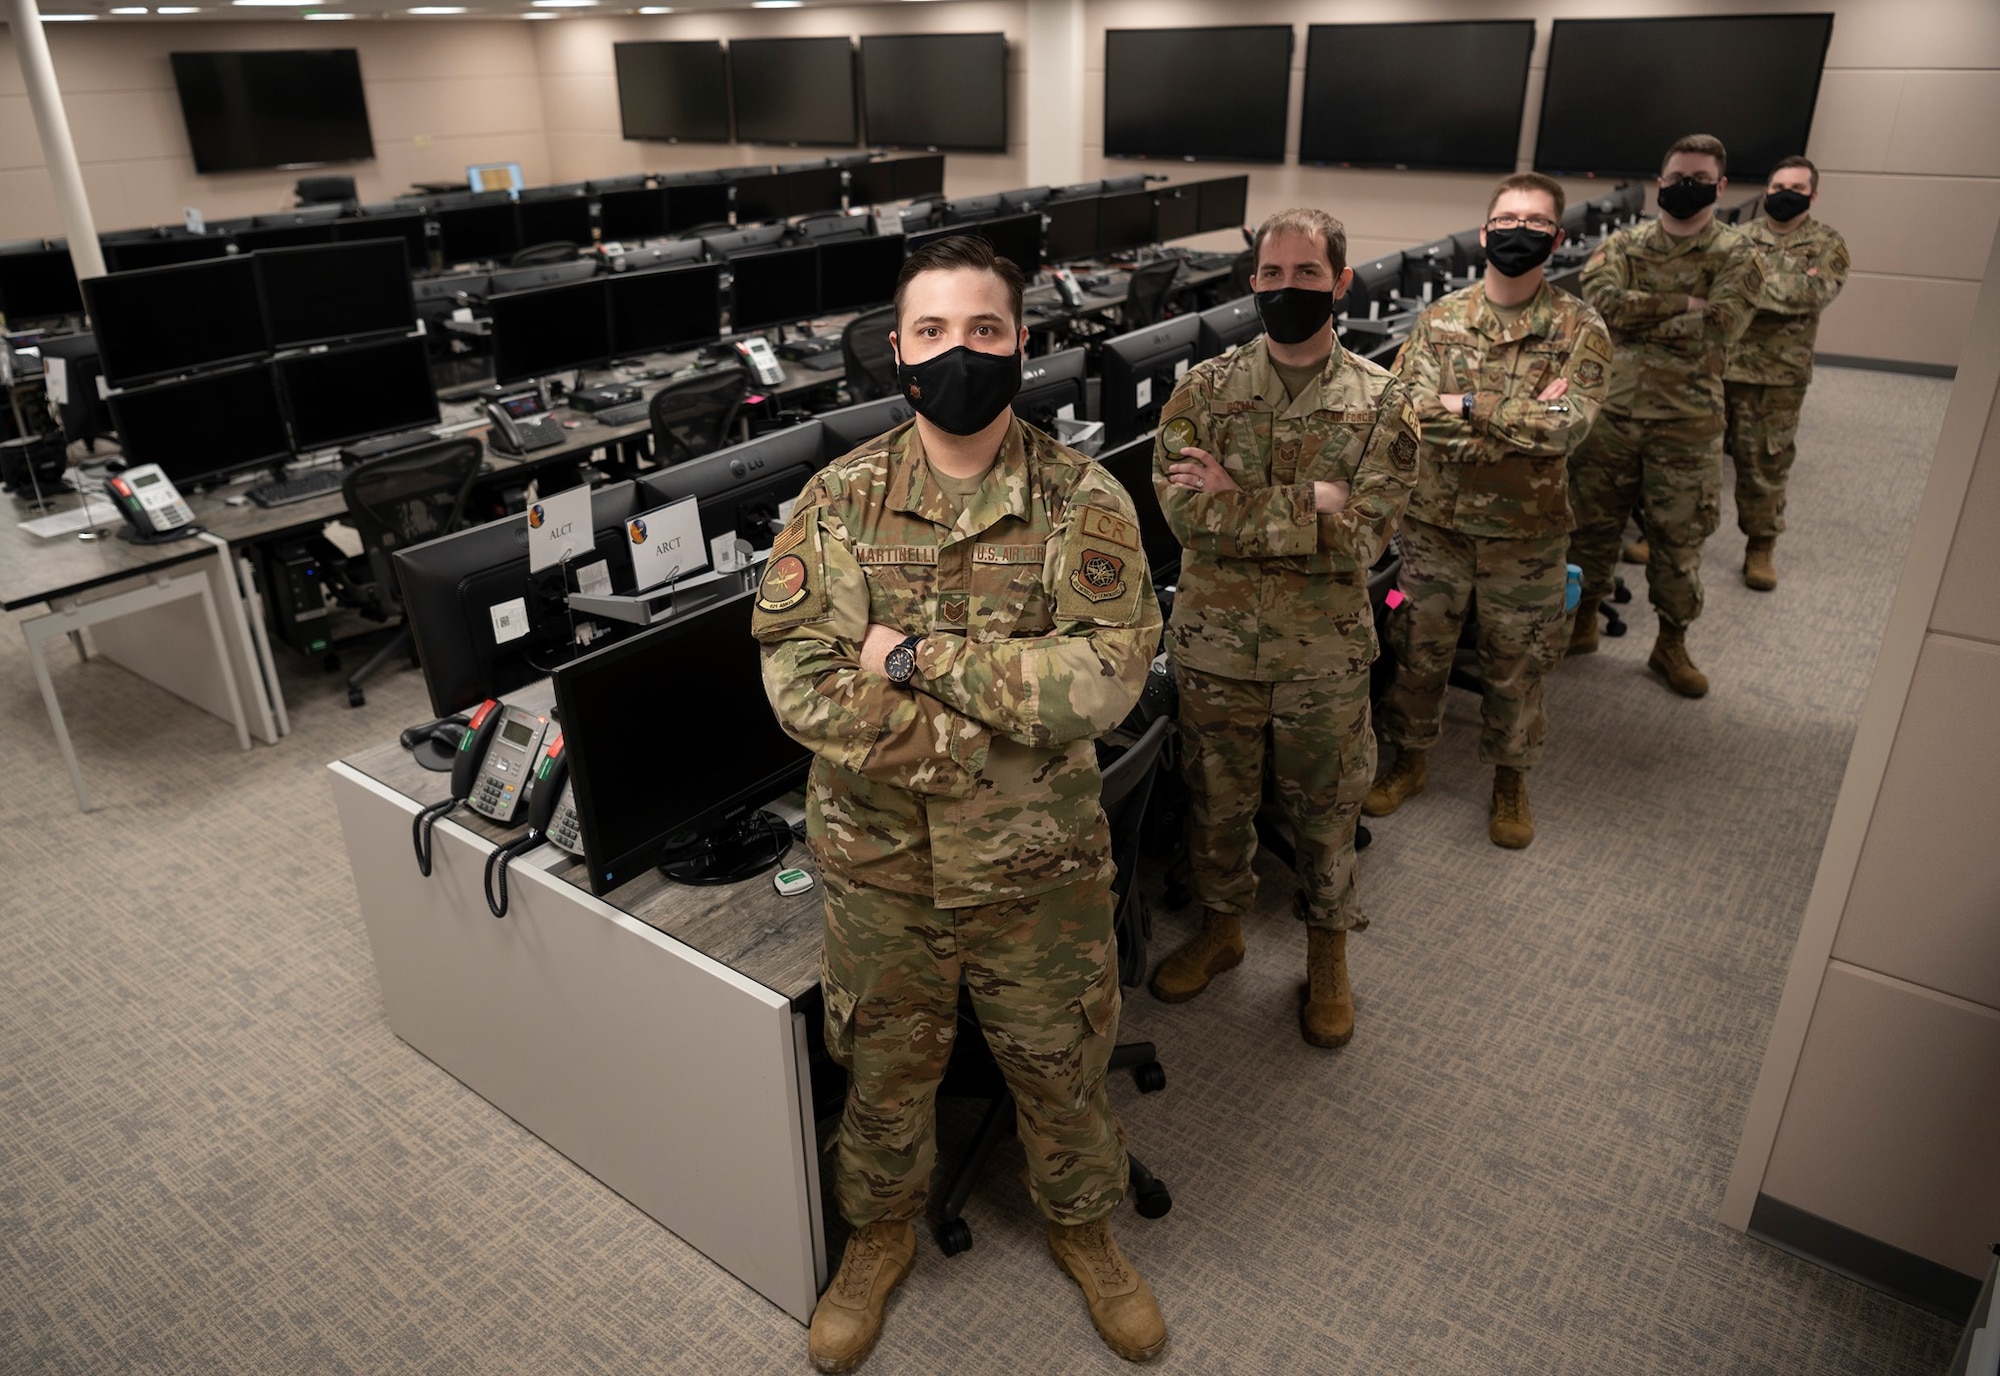 Airmen with the 621st Air Mobility Operations Squadron pose for a group photo April 24, 2021 at the newly renovated weapon system suite at Joint Base McGuire-Dix-Lakehurst, New Jersey. The weapon system suite empowers air mobility command and control experts to execute air operations remotely, supporting combatant commanders across a full range of military operations. (U.S. Air Force photo by Tech. Sgt. Luther Mitchell Jr.)